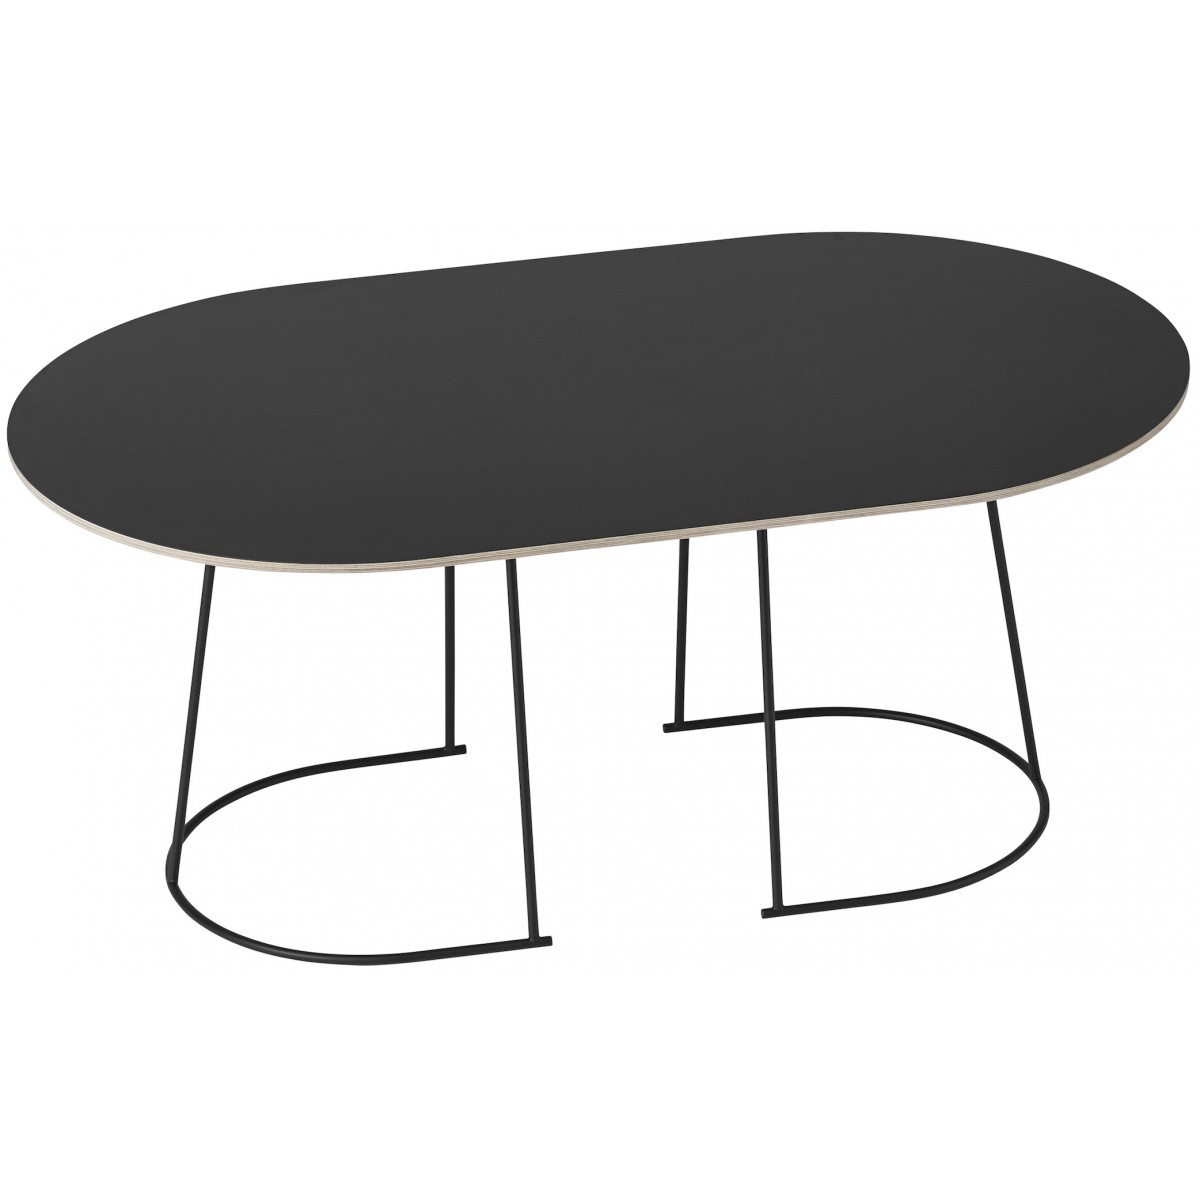 M - black - Airy table